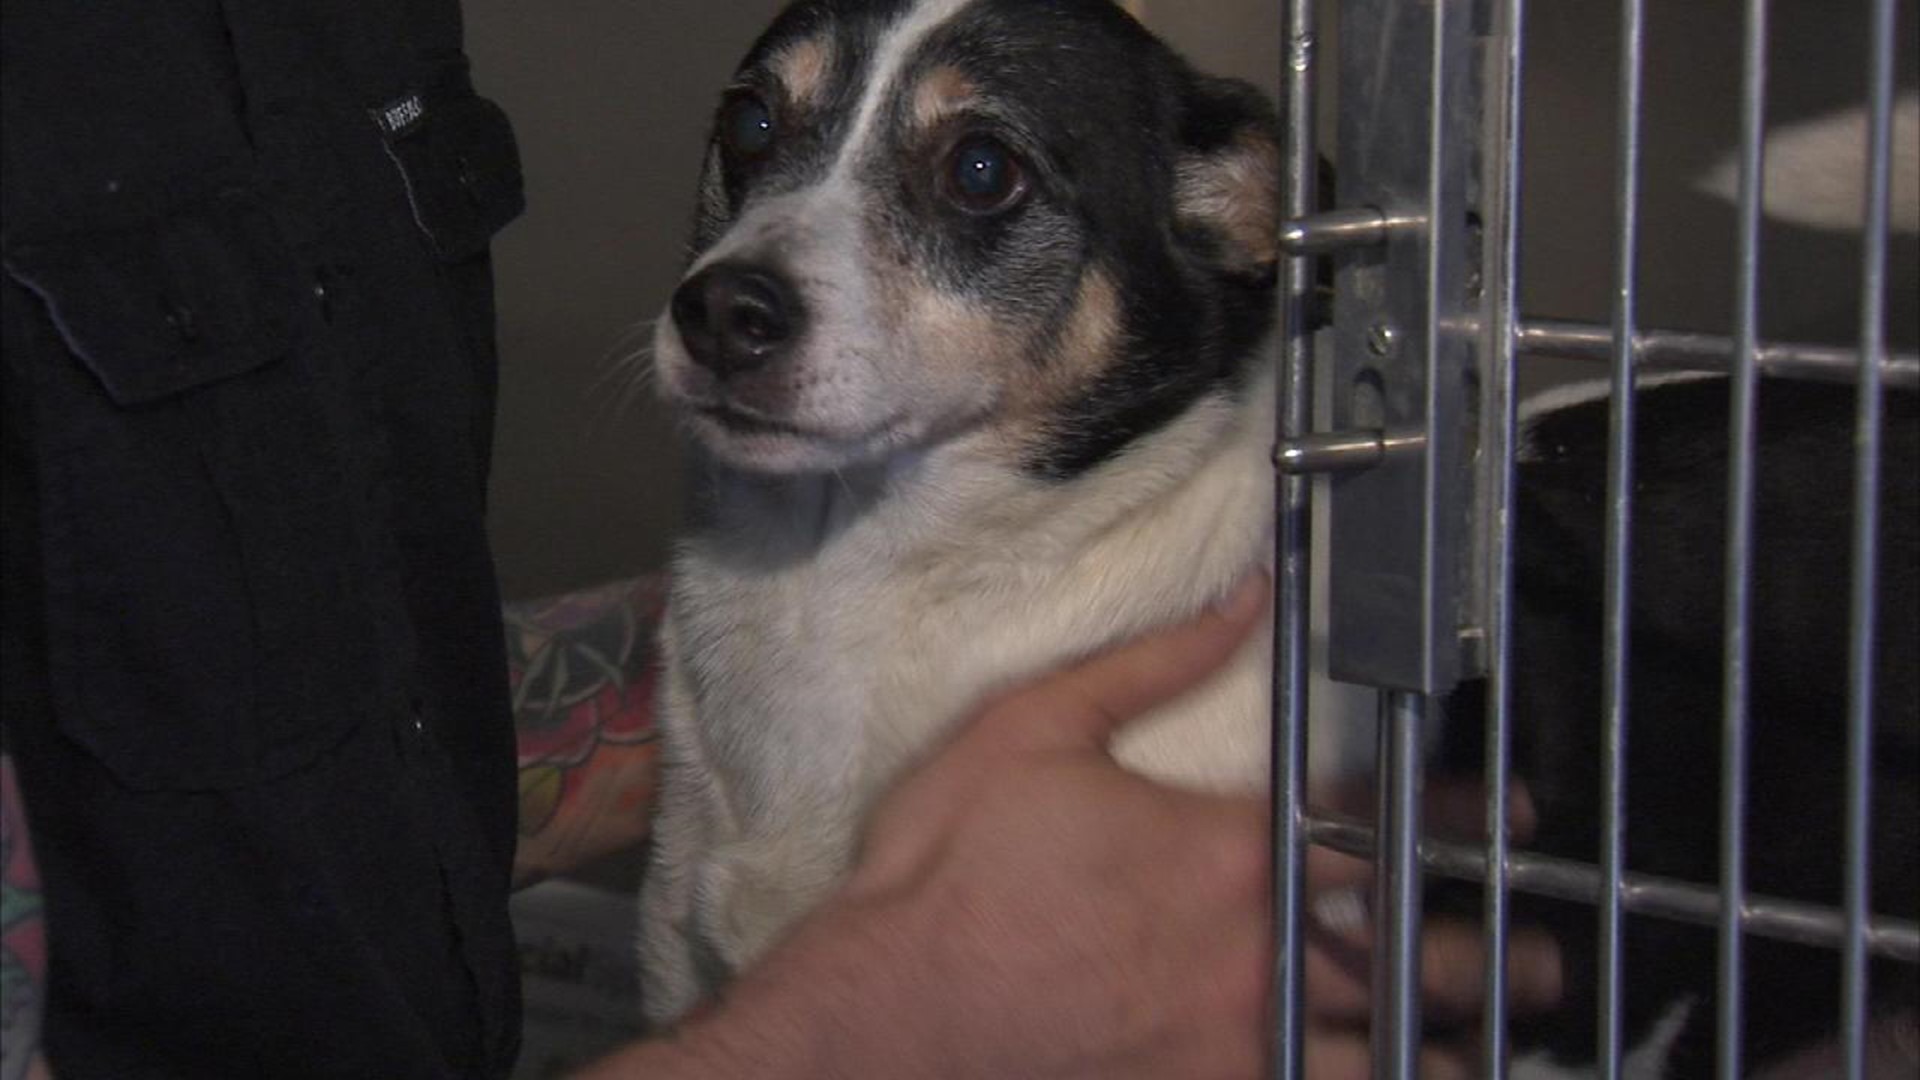 Report Exposes Problems at Animal Shelter 